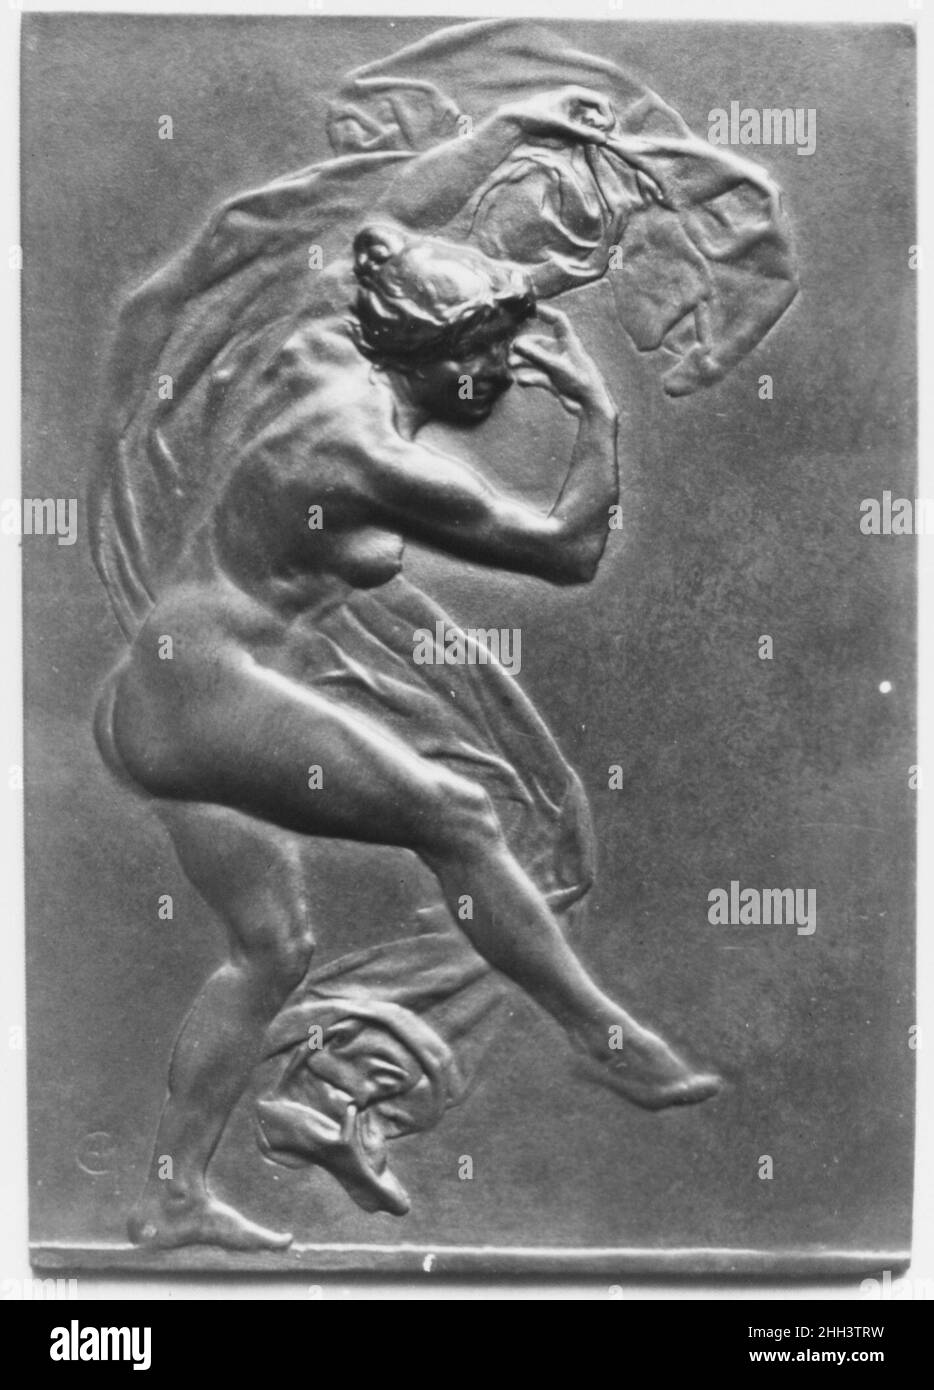 La Danse (one of a pair) before 1903 Alexandre-Louis-Marie Charpentier. La Danse (one of a pair)  188814 Artist: Alexandre-Louis-Marie Charpentier, French, Paris 1856?1909 Neuilly, La Danse (one of a pair), before 1903, Bronze, 5 3/8 ? 3 7/8 in. (13.7 ? 9.8 cm). The Metropolitan Museum of Art, New York. Gift of Victor D. Brenner, 1903 (03.7.23) Stock Photo